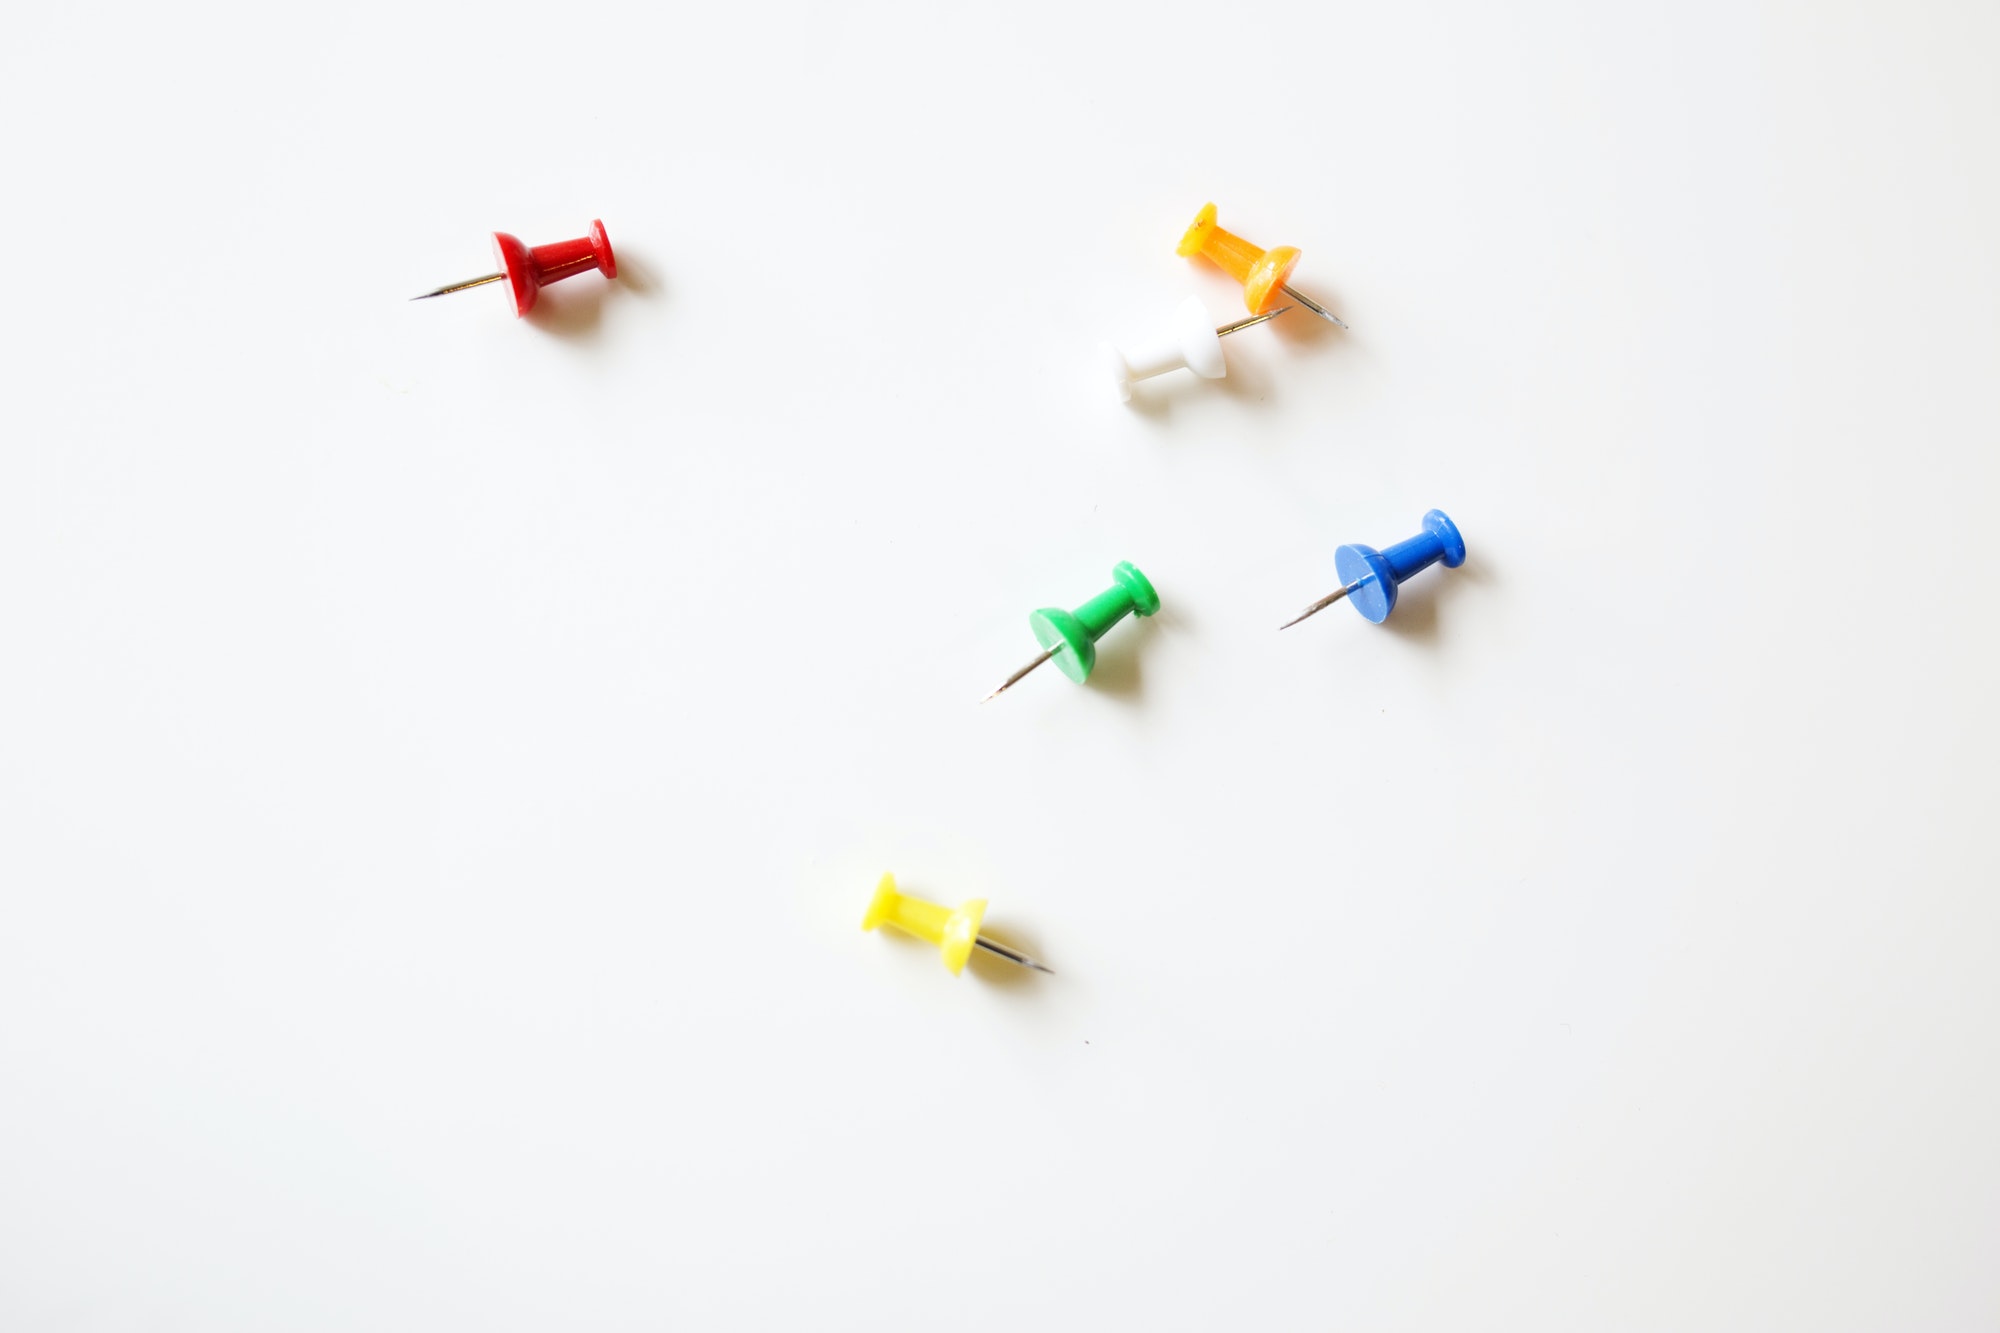 Bright colored pushpins on a white table